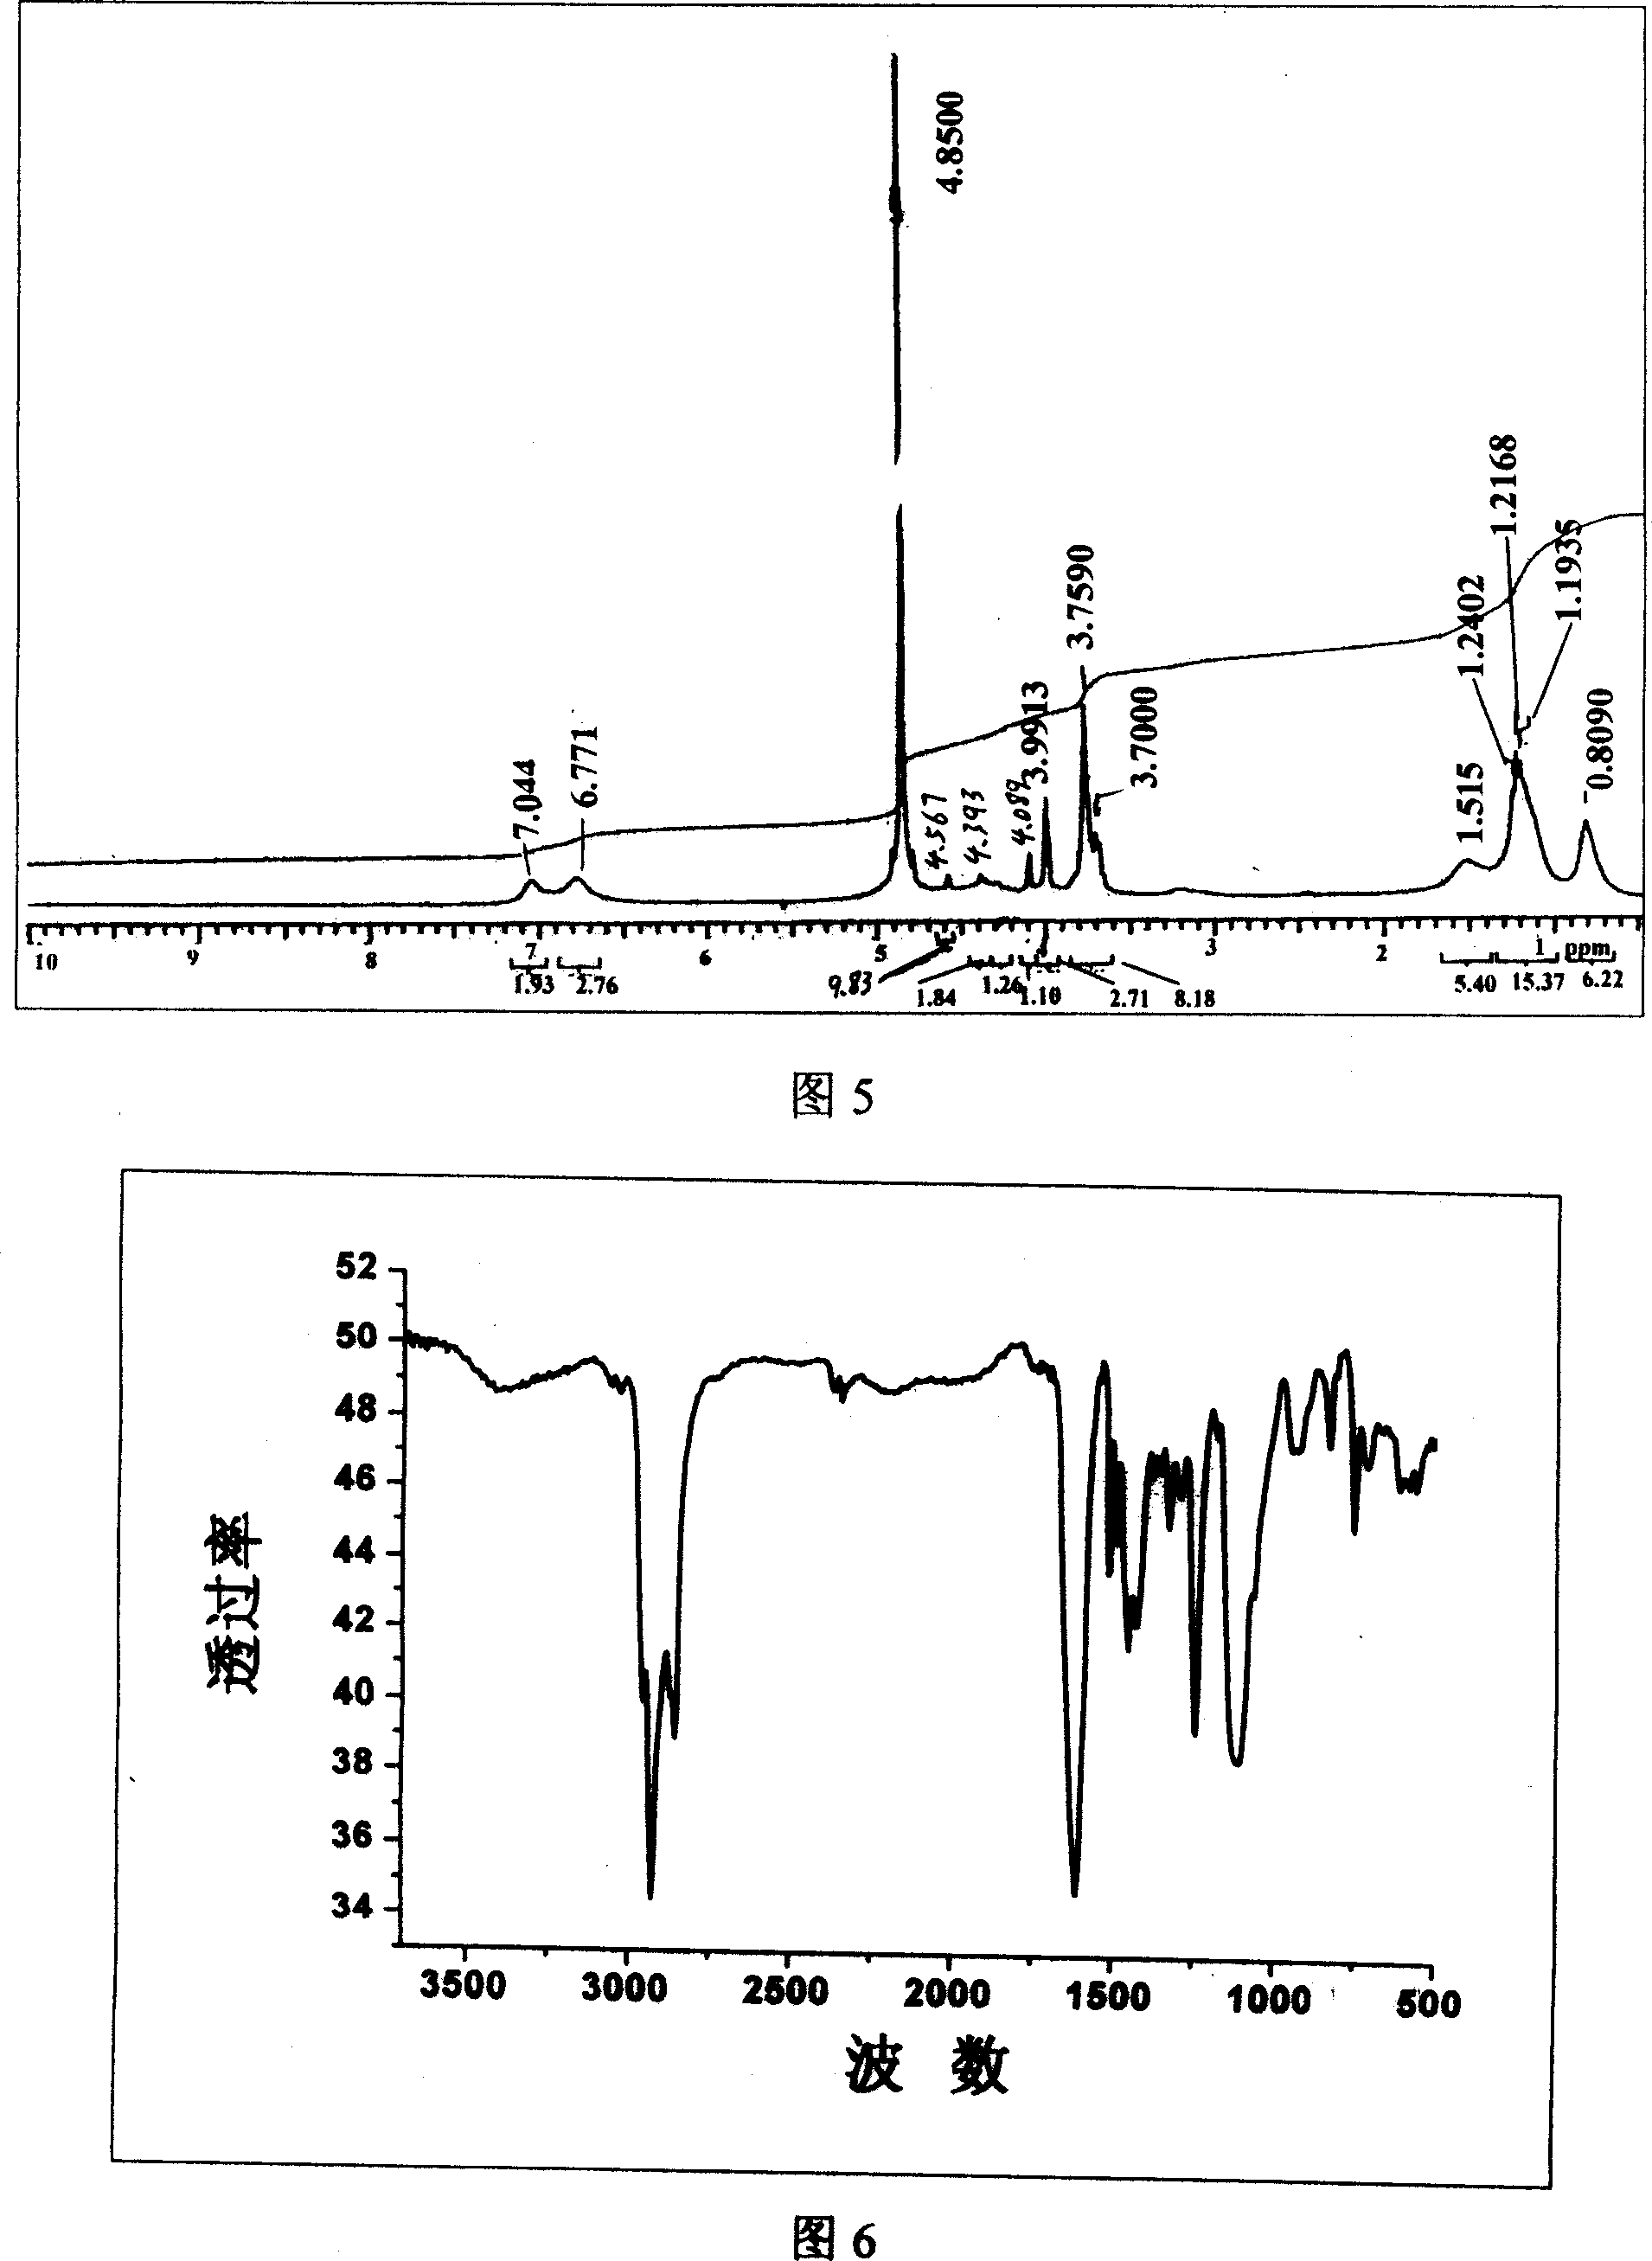 Straight chain alkyl phenol homogeneity polyethenoxy ether acetic acid surfactant and method of preparing the same and use thereof